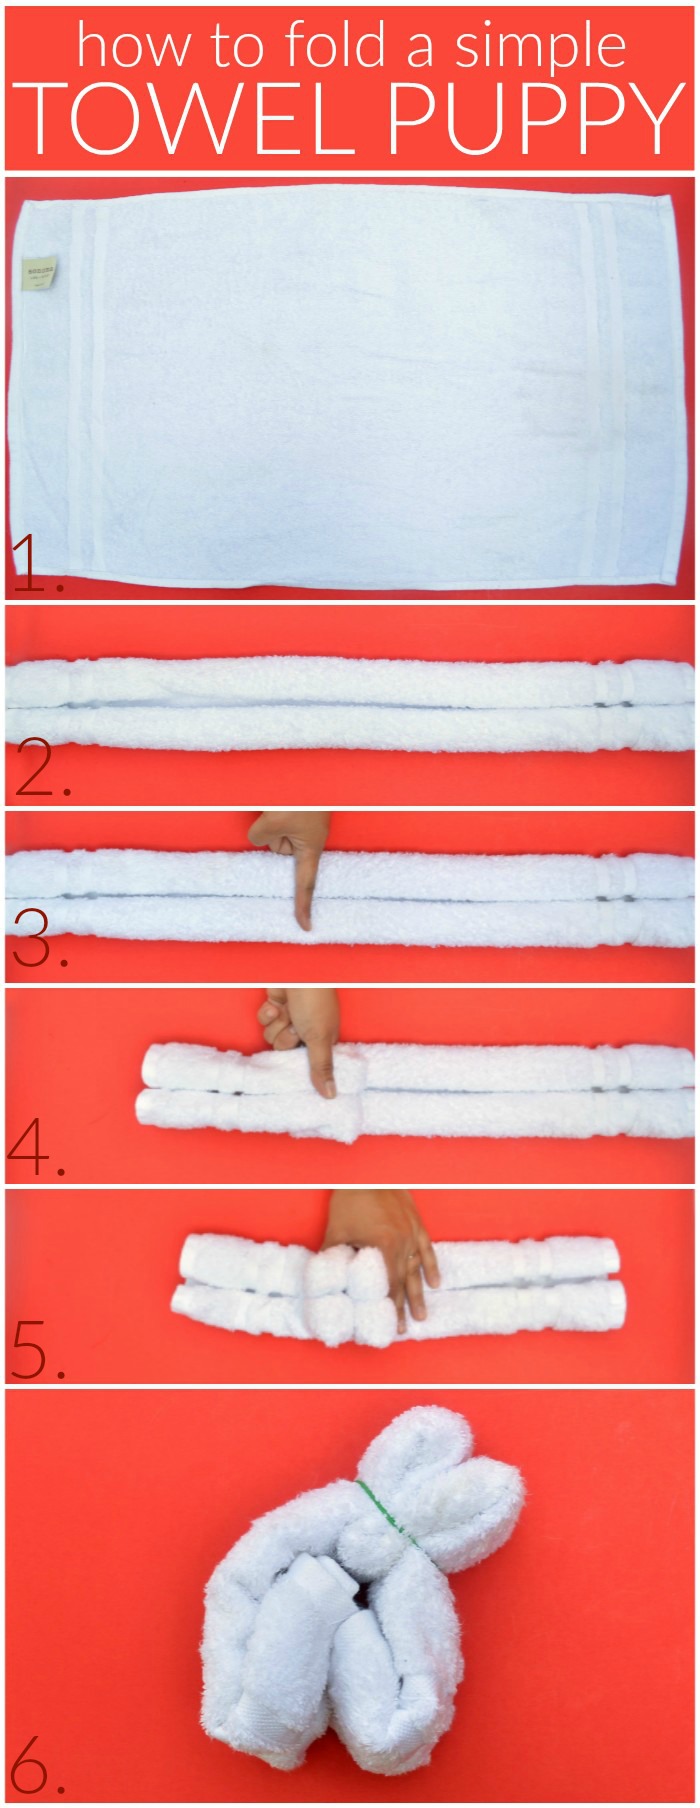 step by step photos of folding a towel to look like a puppy